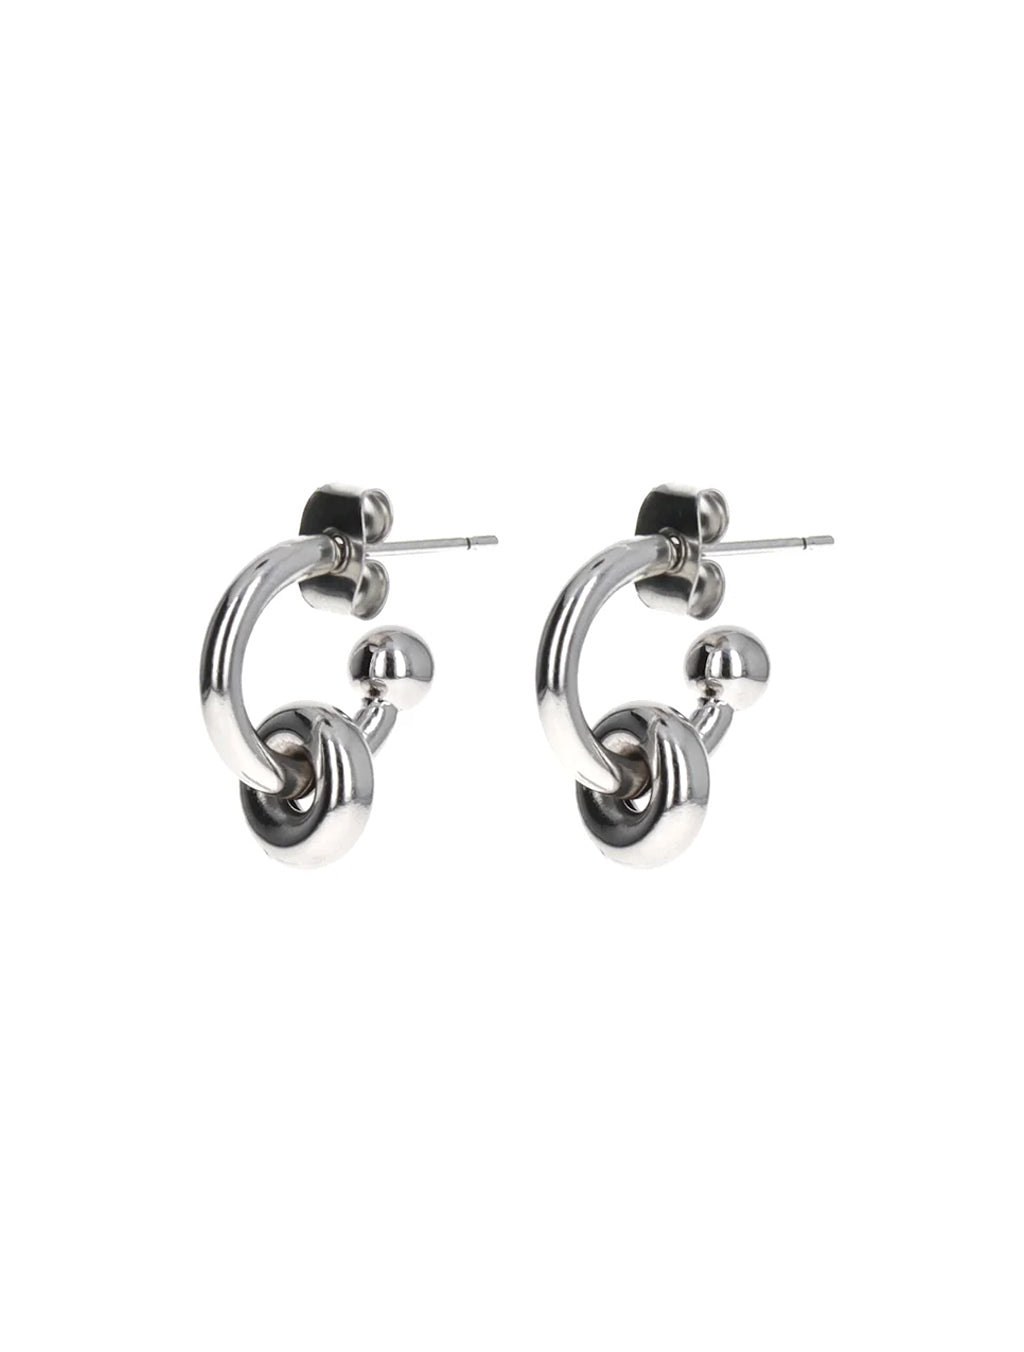 Justine Clenquet Ethan Palladium Earrings